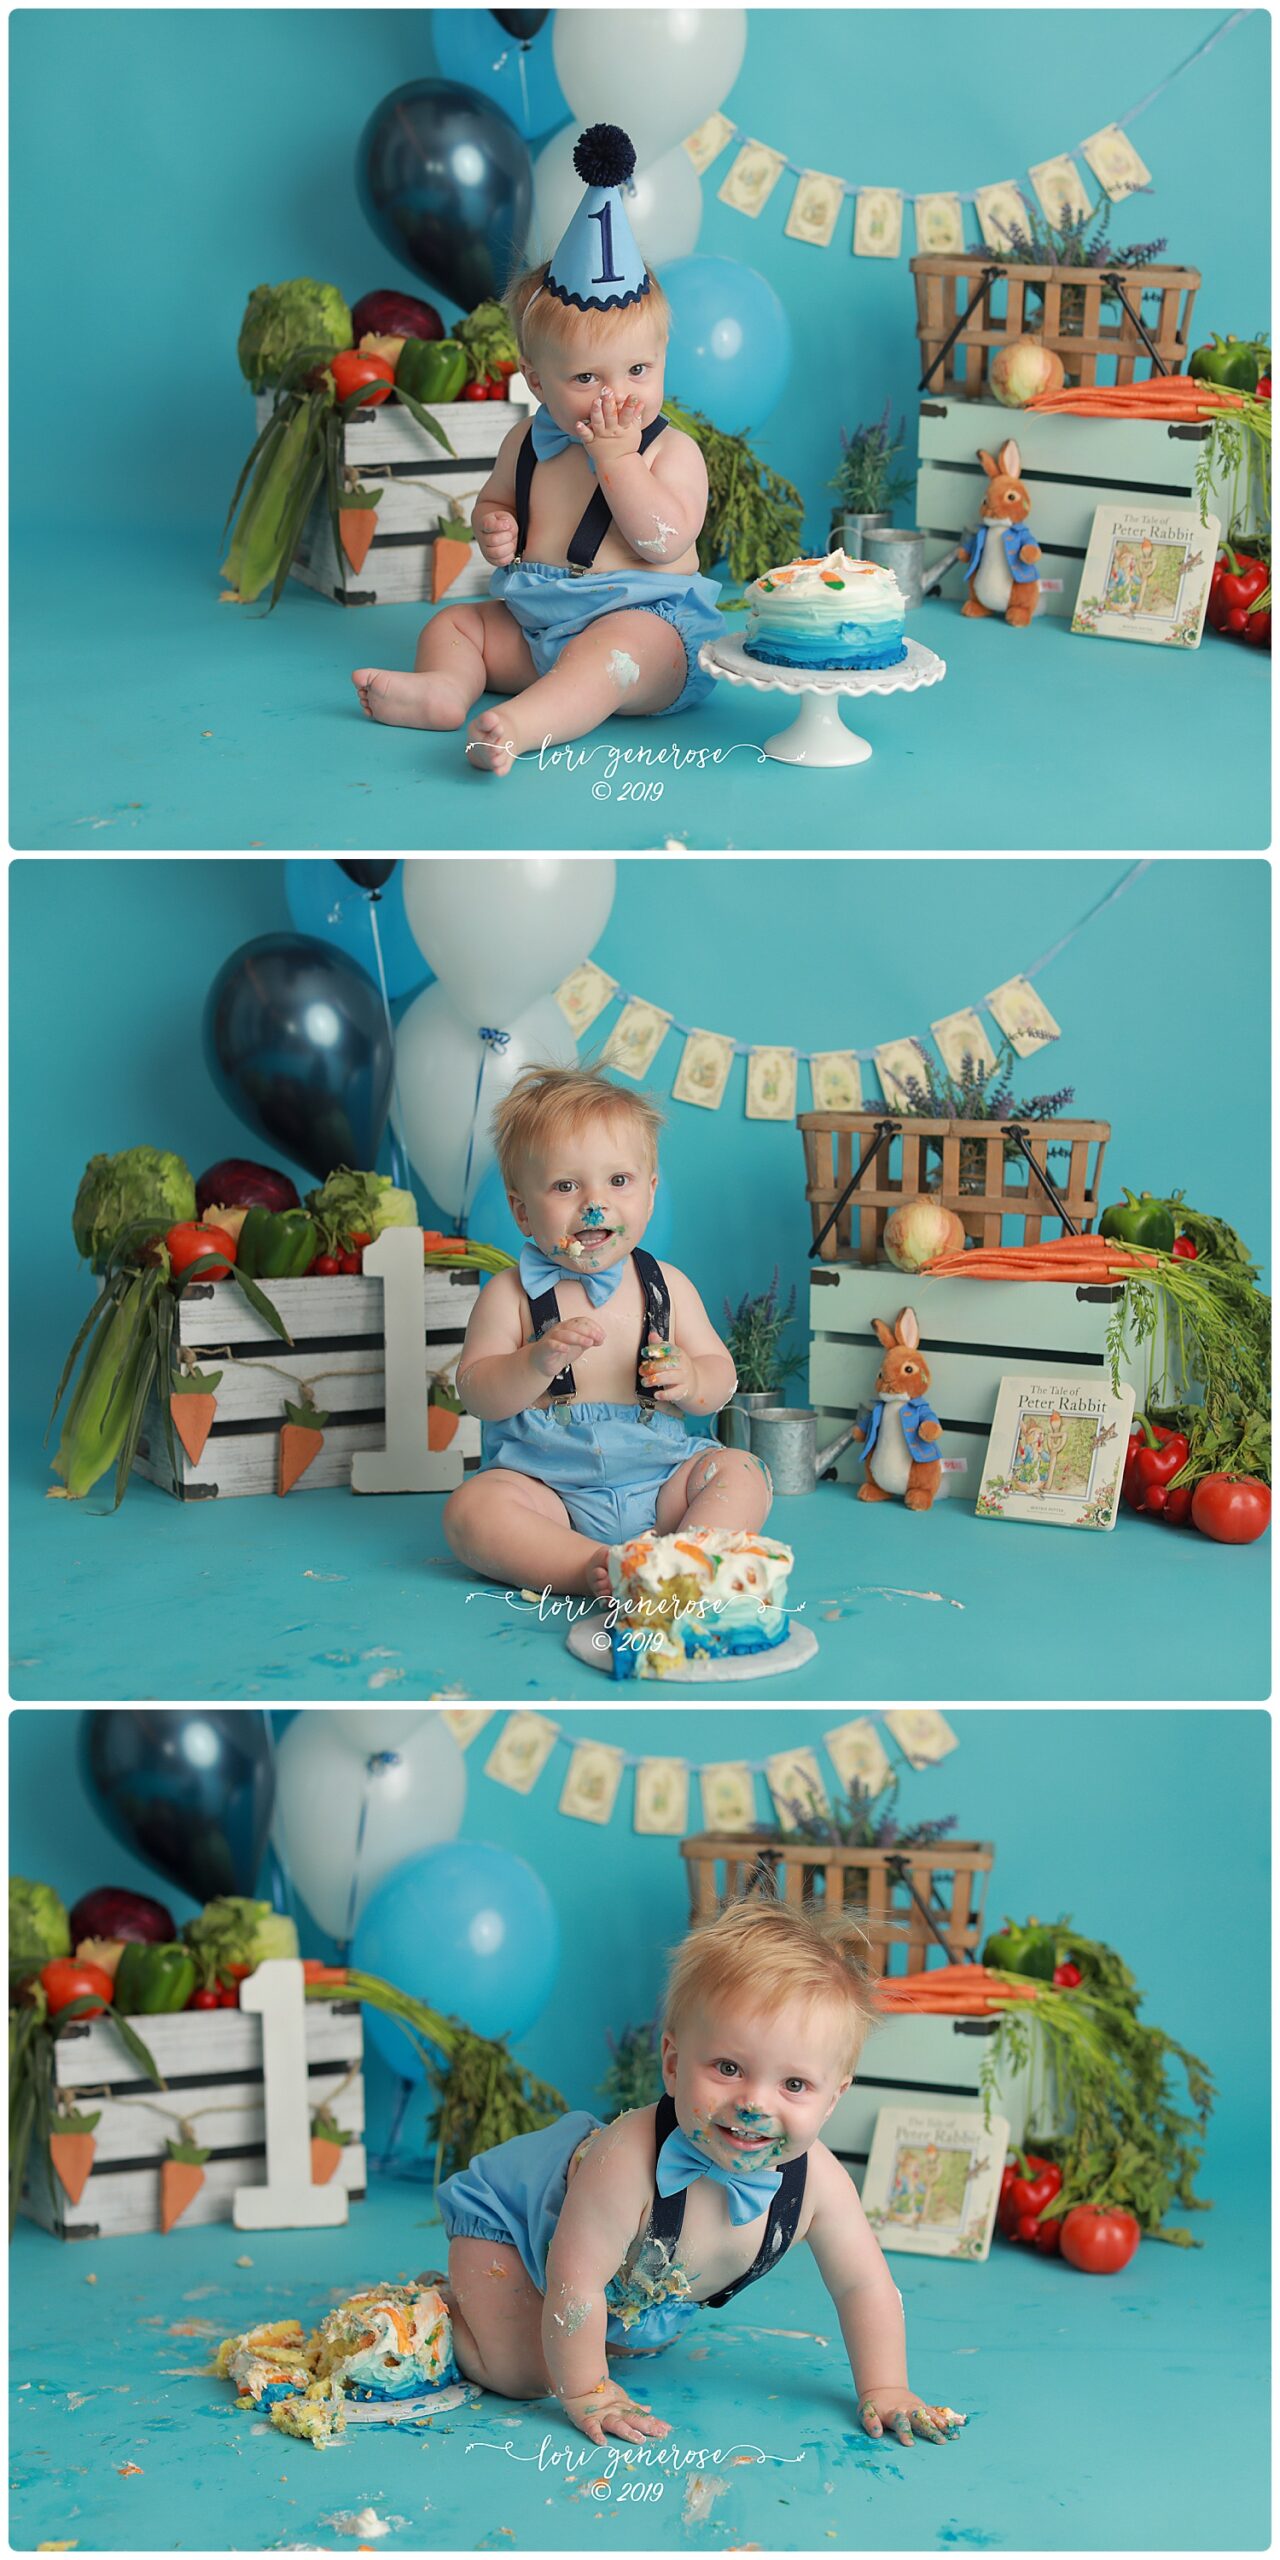 Rhydian’s almost ONE! His mama brought some awesome props for his Peter Rabbit smash!